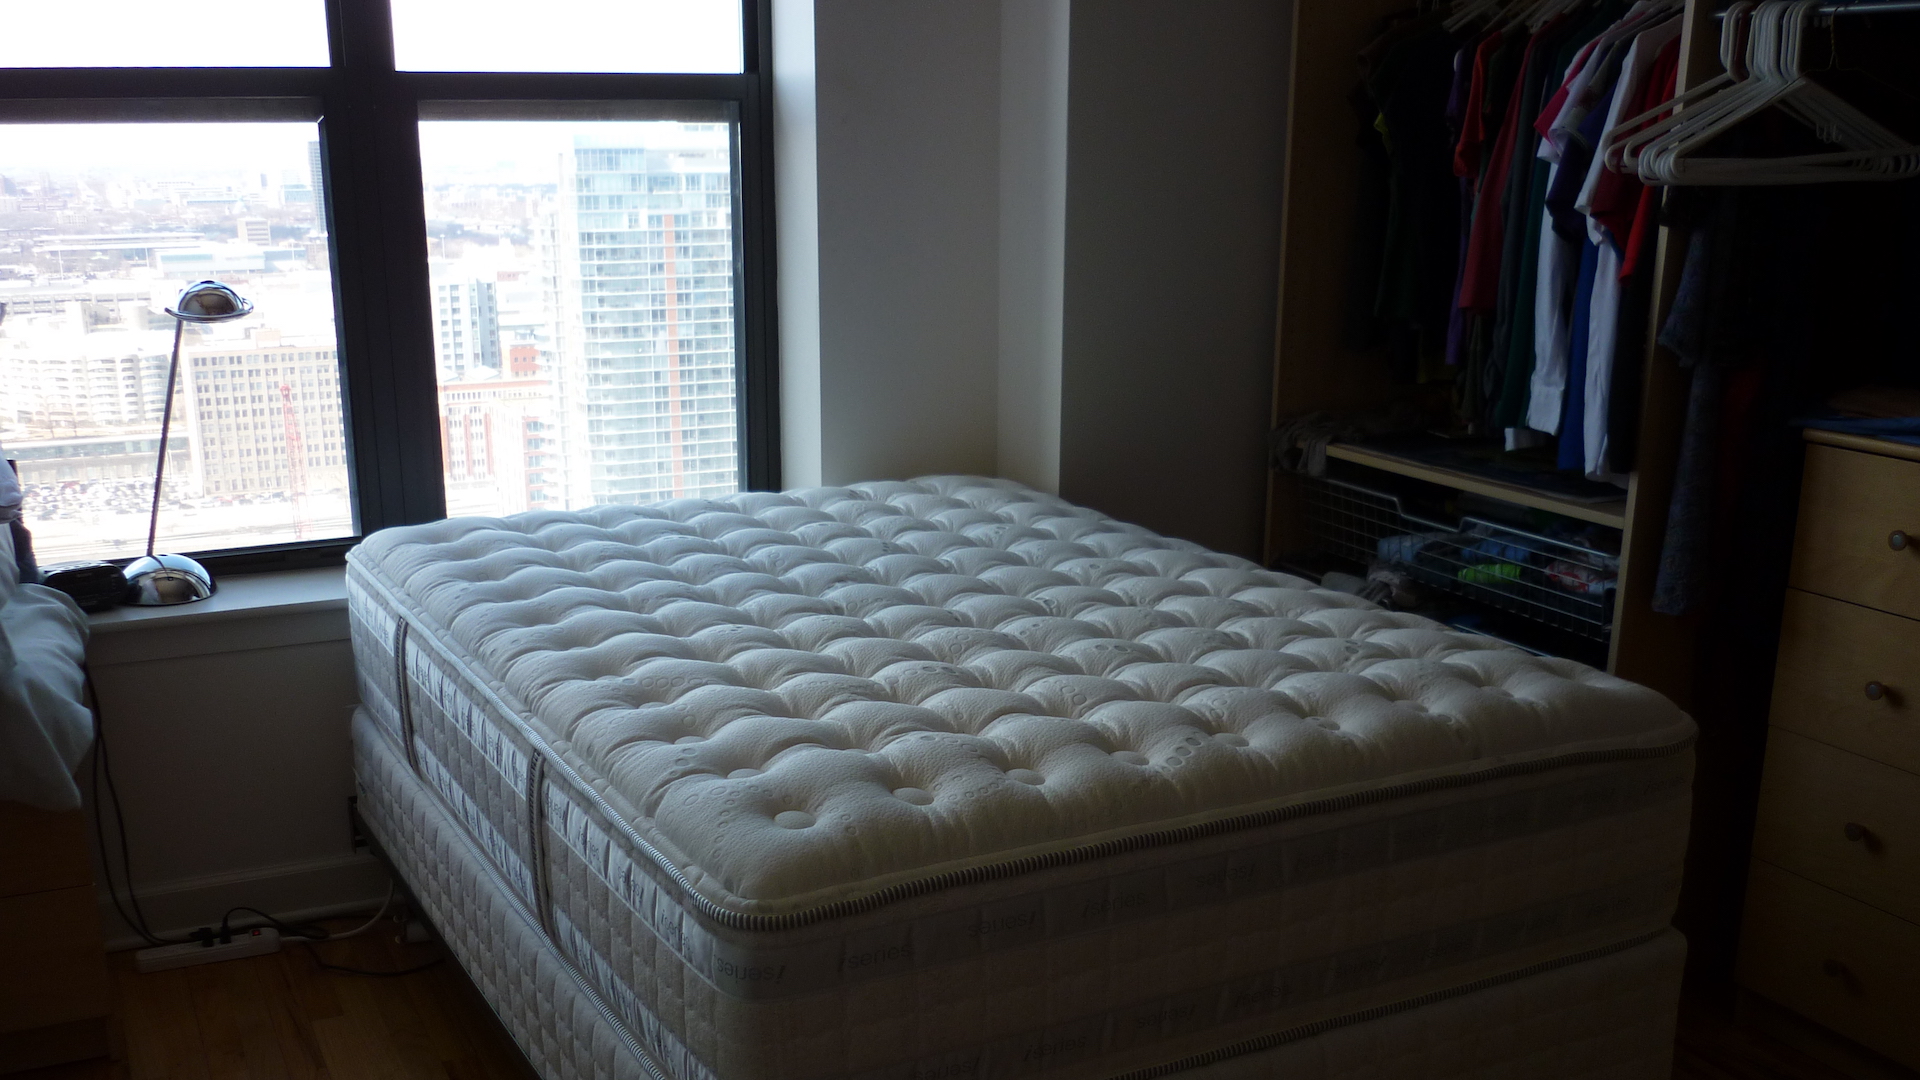 A mattress without a sheet in an apartment by the window